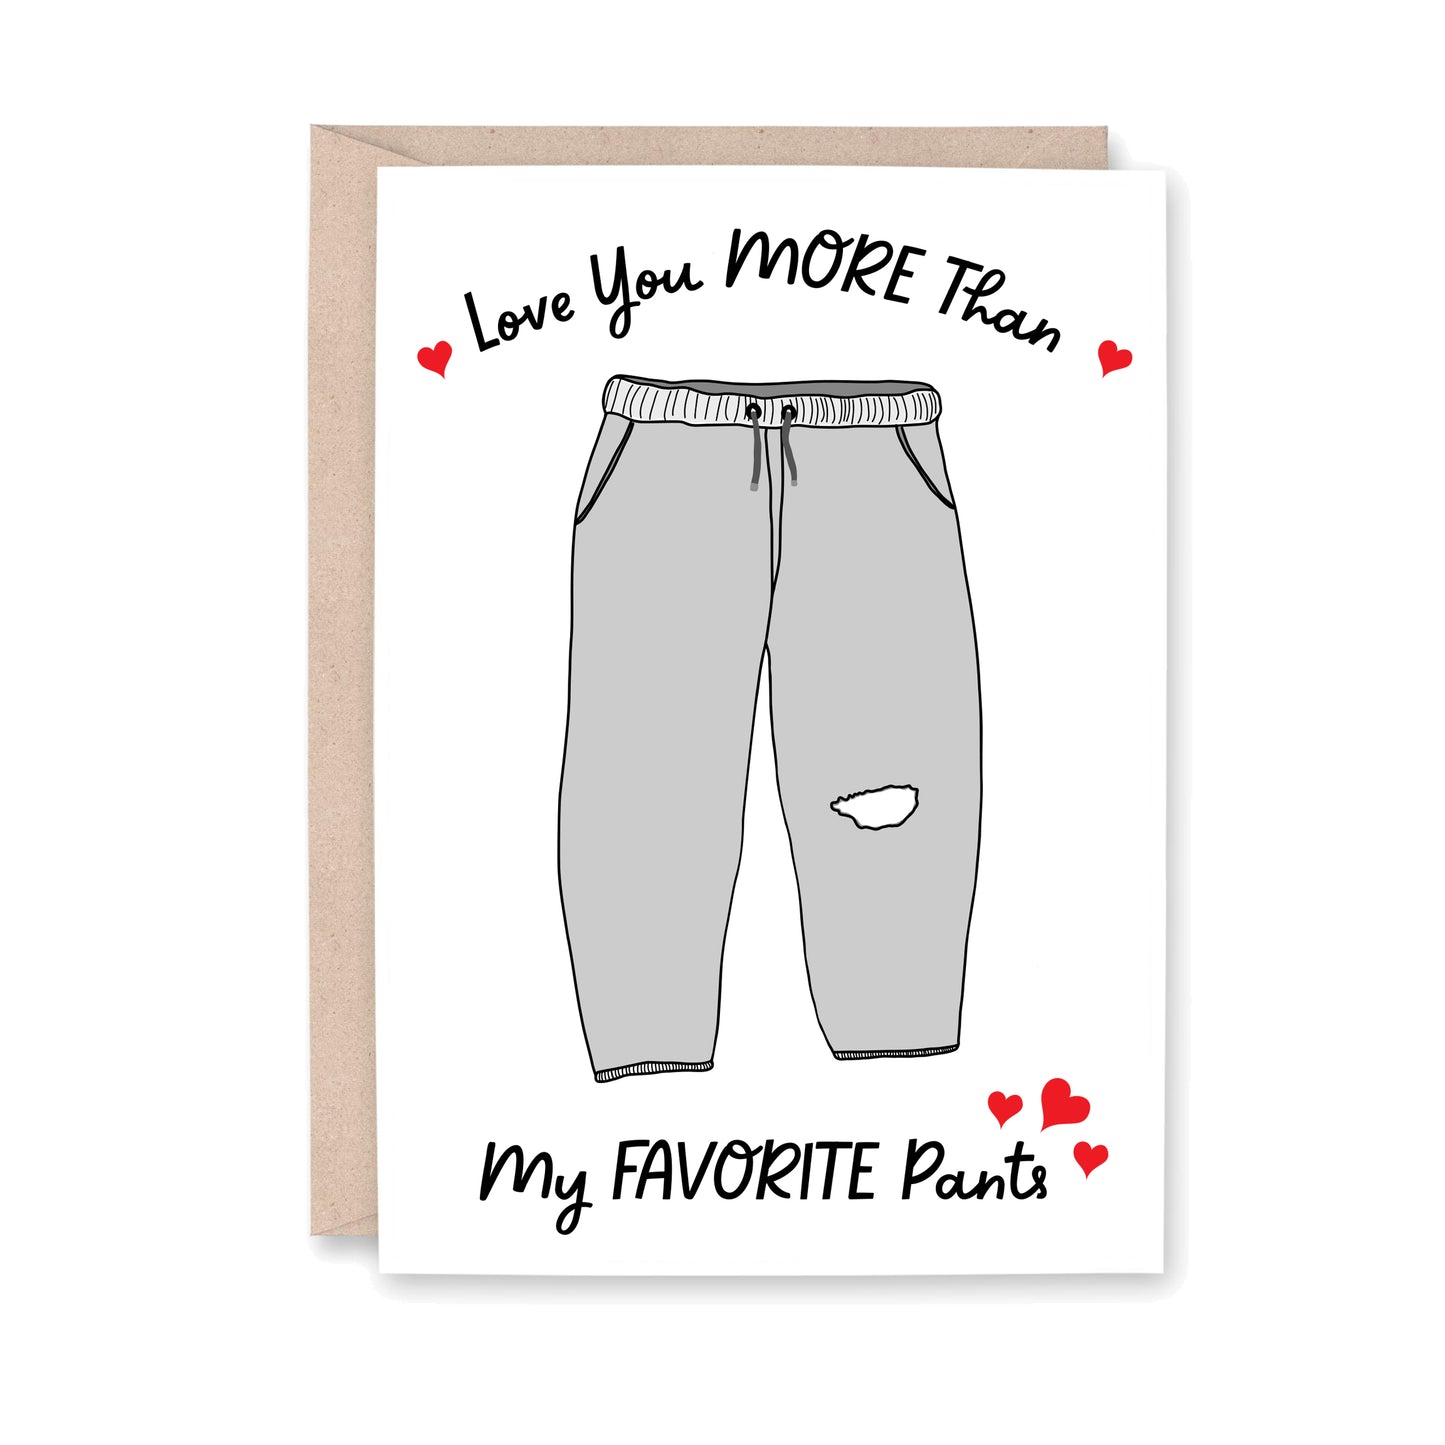 Greeting Card that read: Love you MORE than my FAVORITE Pants. With an illustrated pair of sweatpants in the middle and five small hearts around the text.